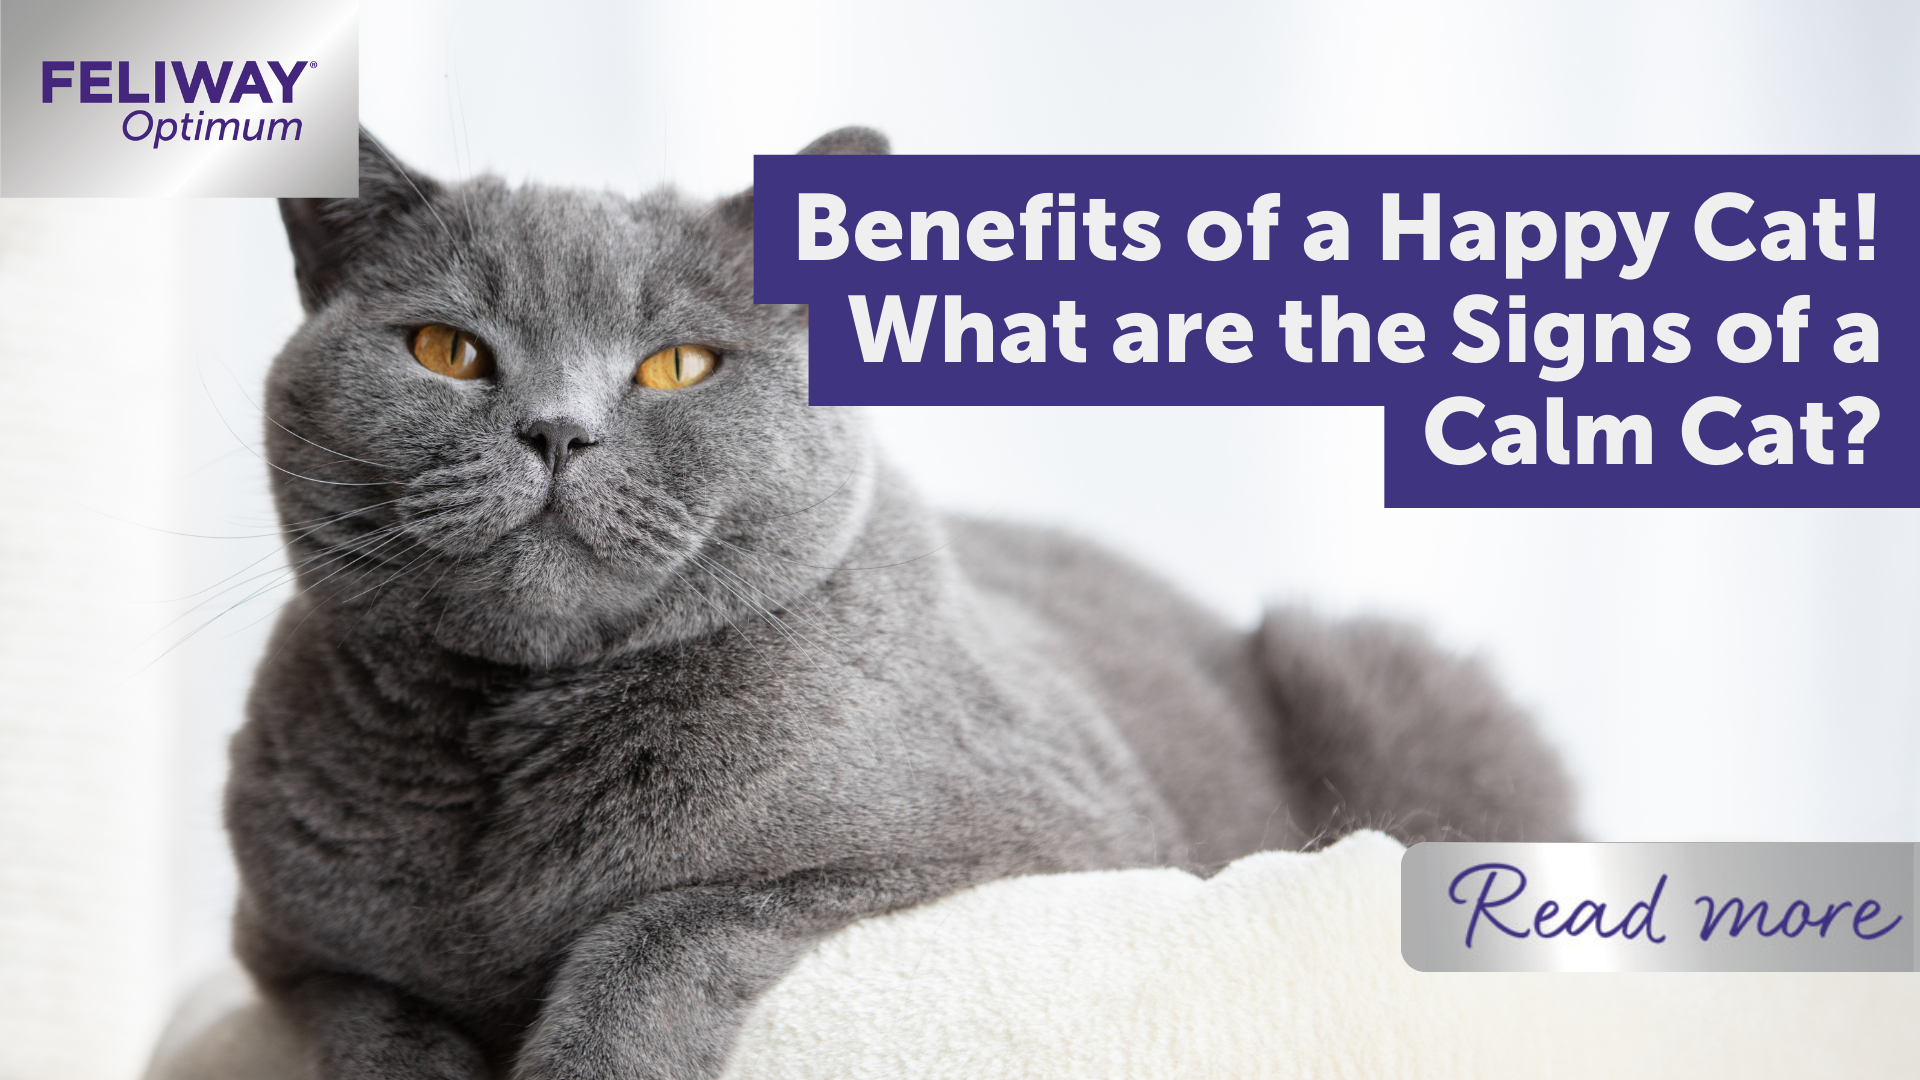 Benefits of a Happy Cat! What are the Signs of a Calm Cat?